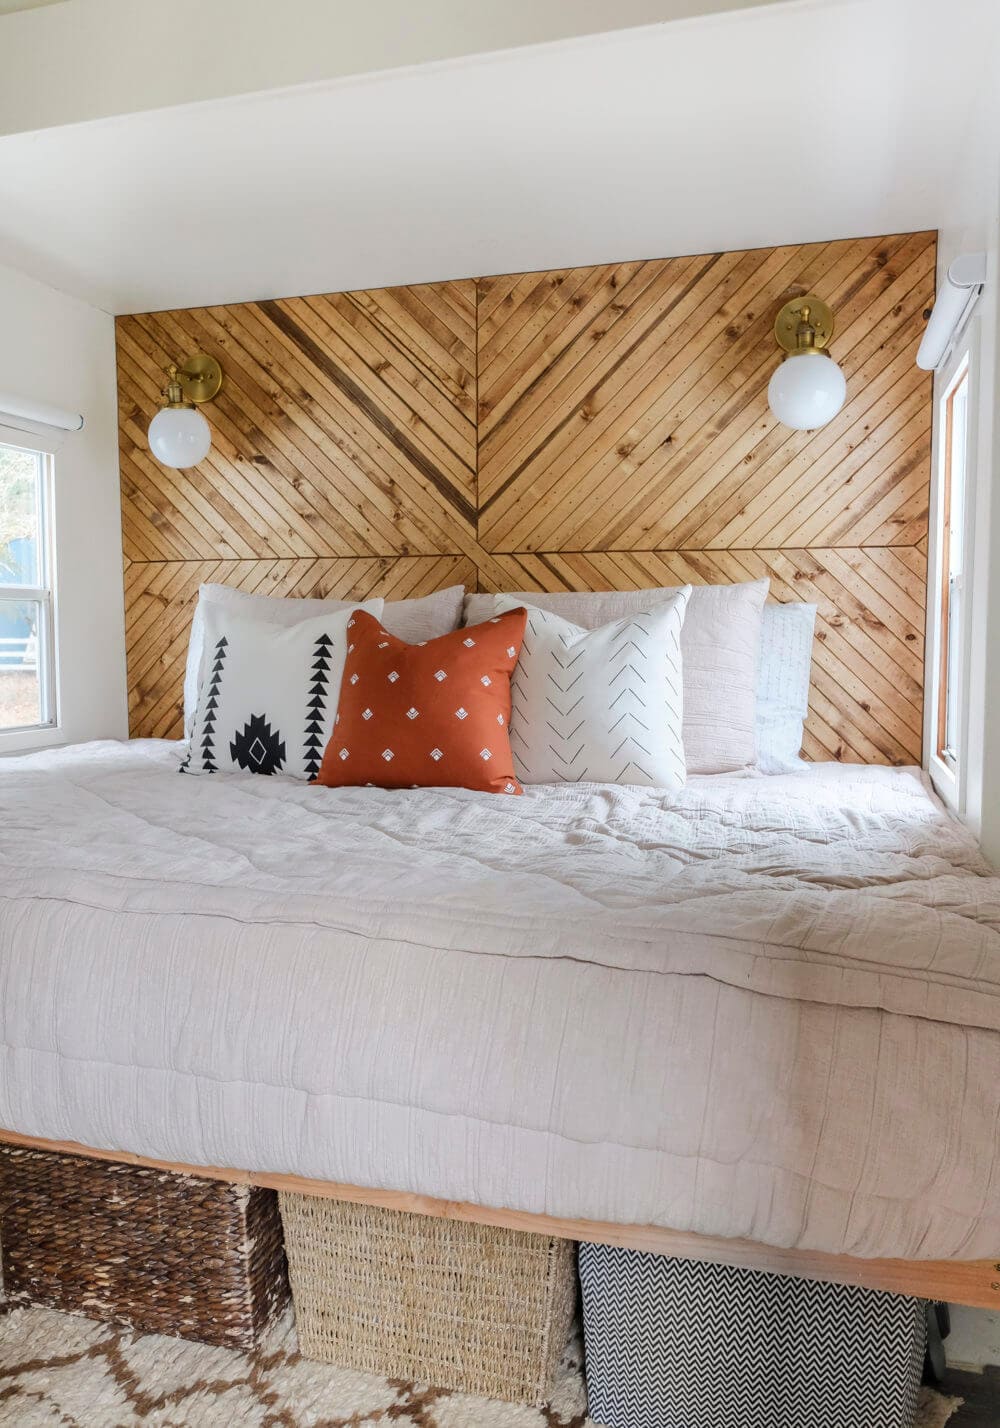 23 of the most appealing bedroom accent wall ideas this year - 69